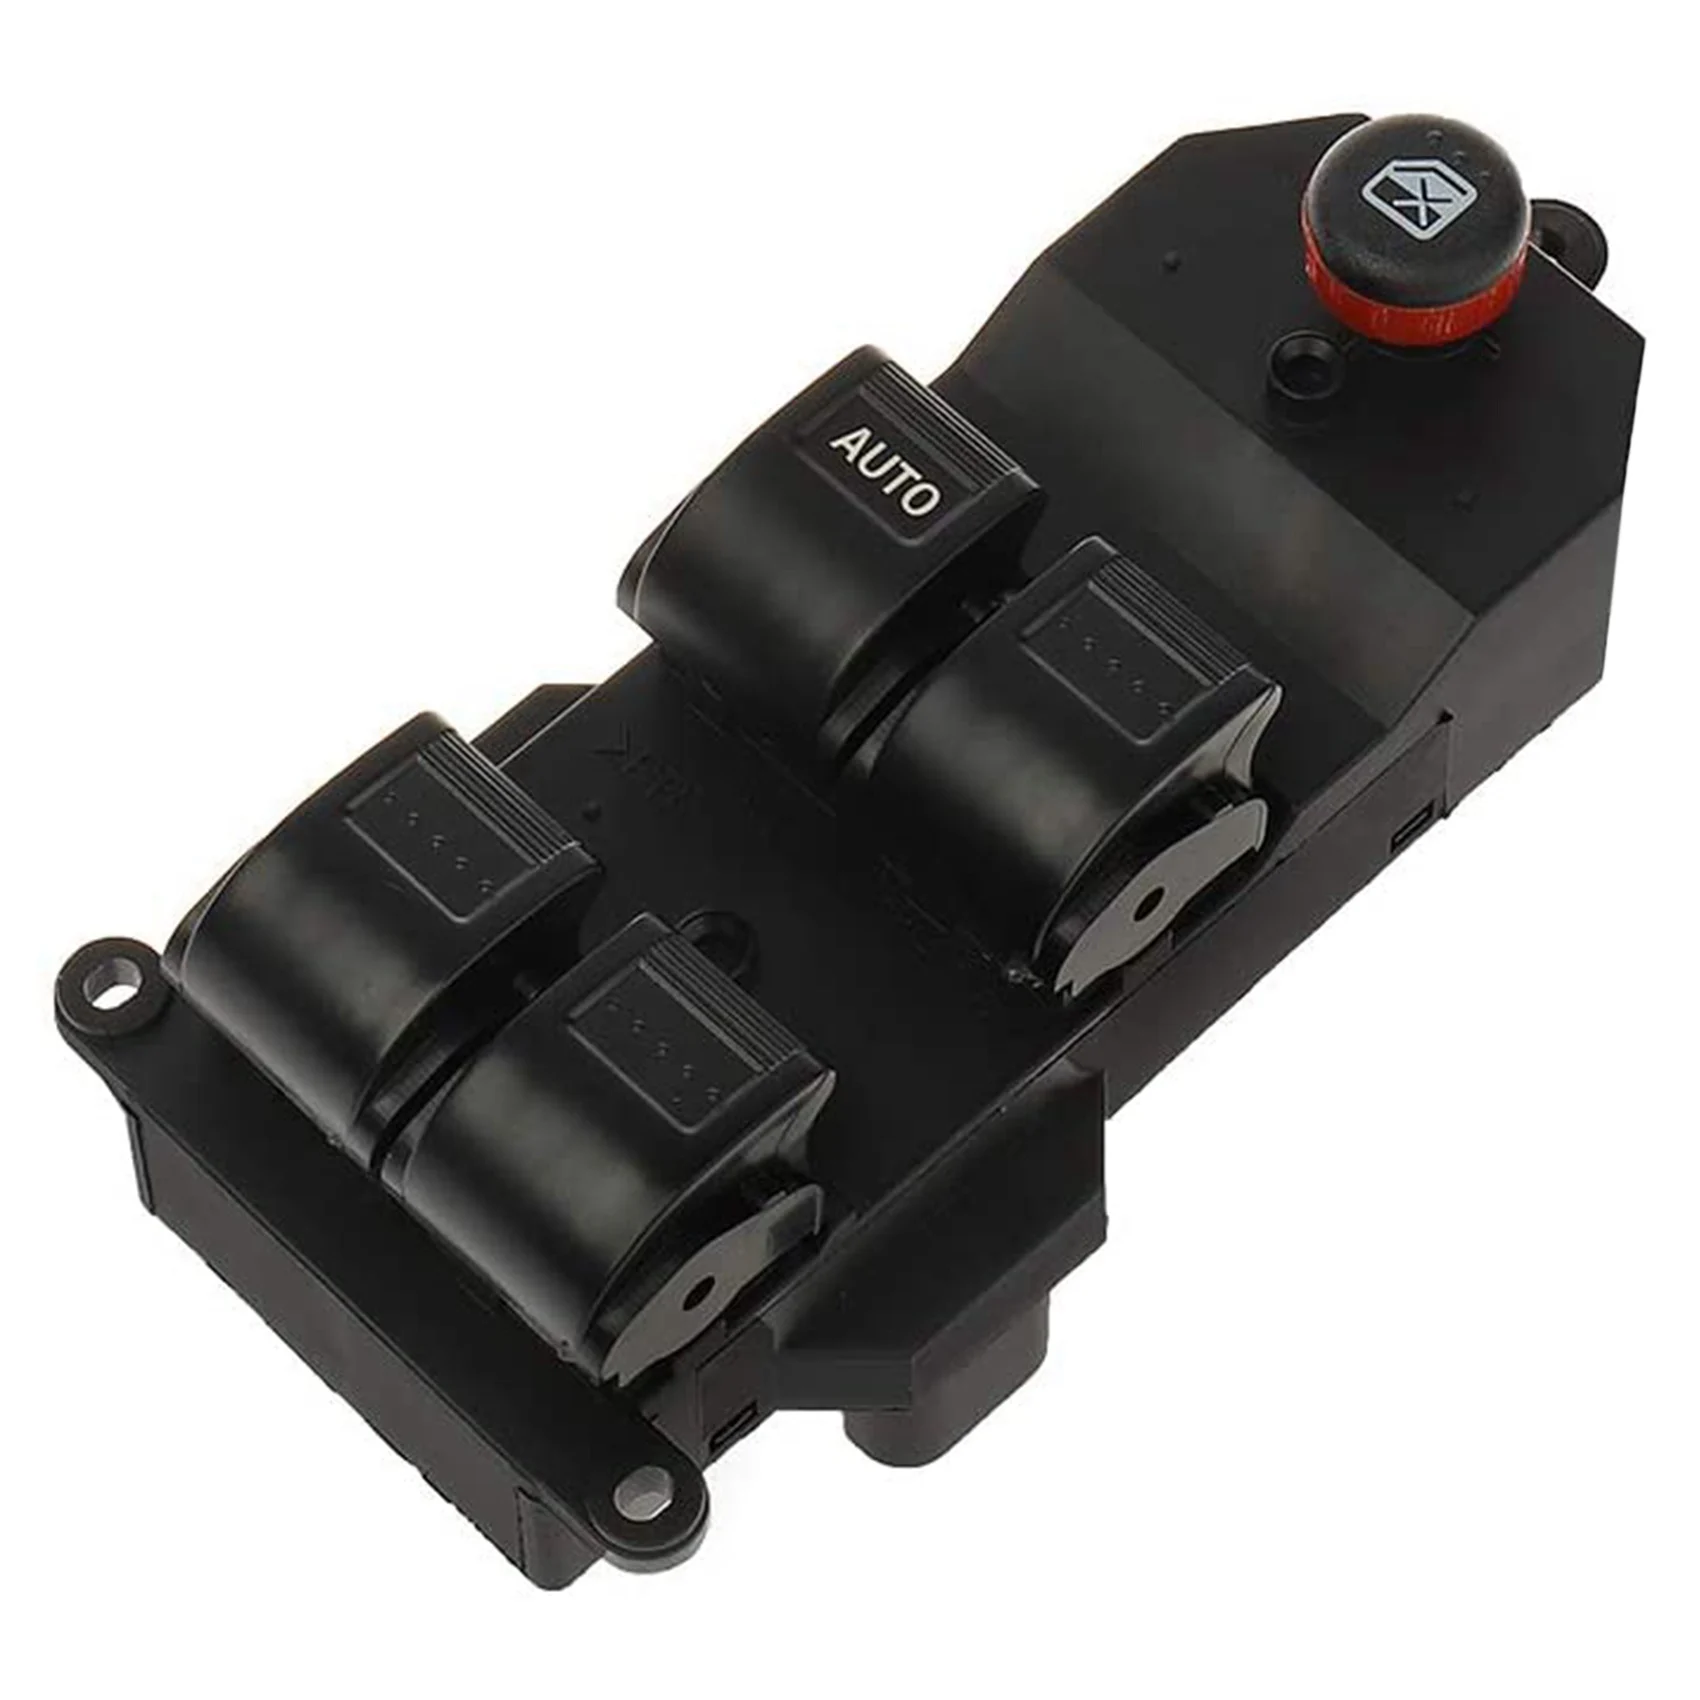 

Window Lifter Switch 35750-S5A-A02- Suitable for 01-05 Glass Lifter Switch Electric Window